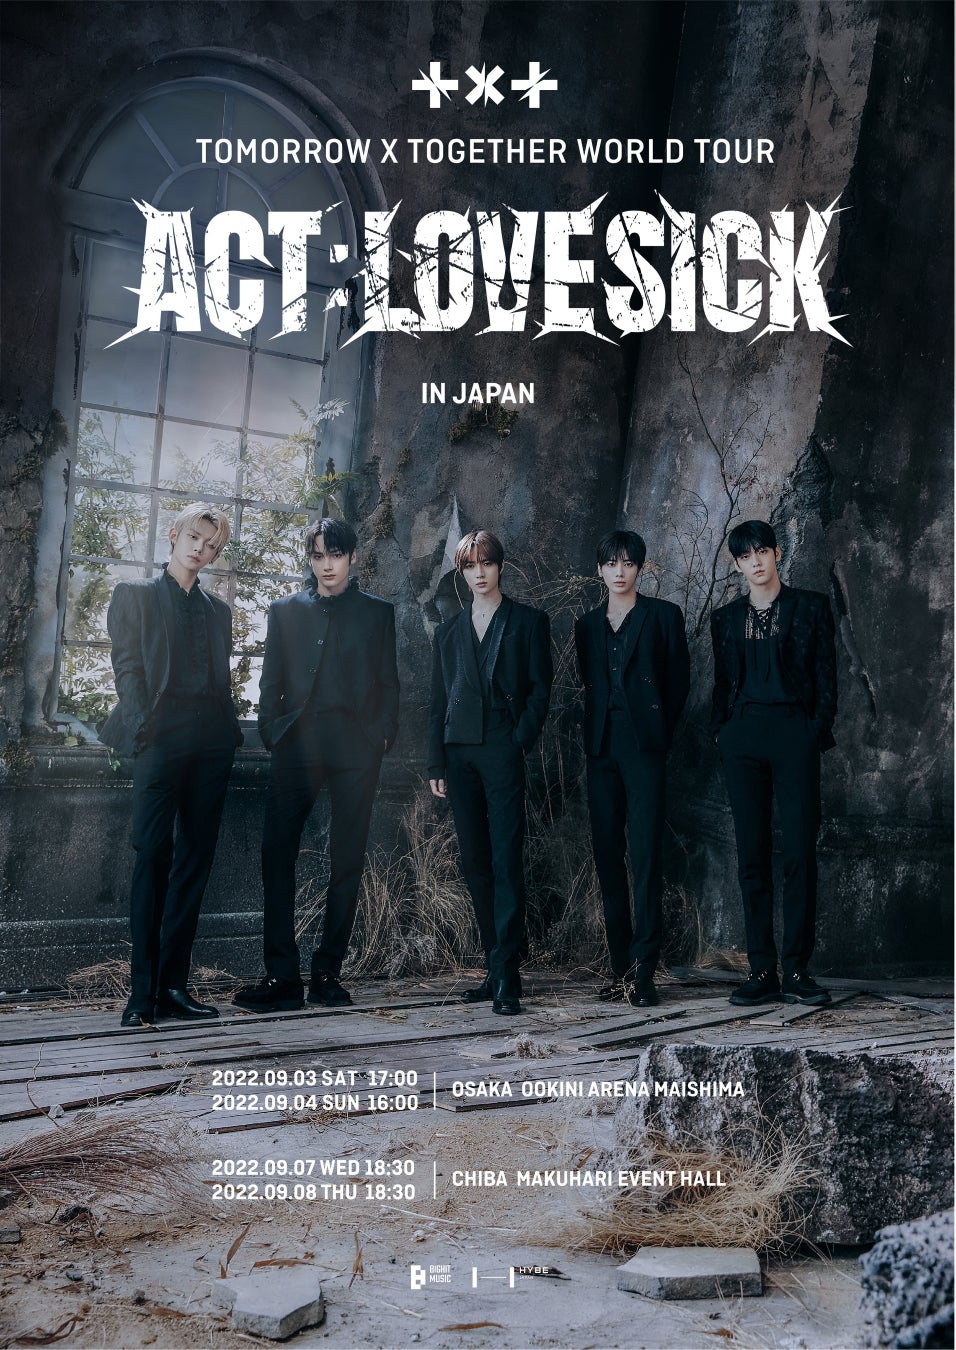 TOMORROW X TOGETHER日本初単独オフライン公演『TOMORROW X TOGETHER WORLD TOUR ＜ACT : LOVE SICK＞ IN JAPAN』開催決定！のサブ画像1